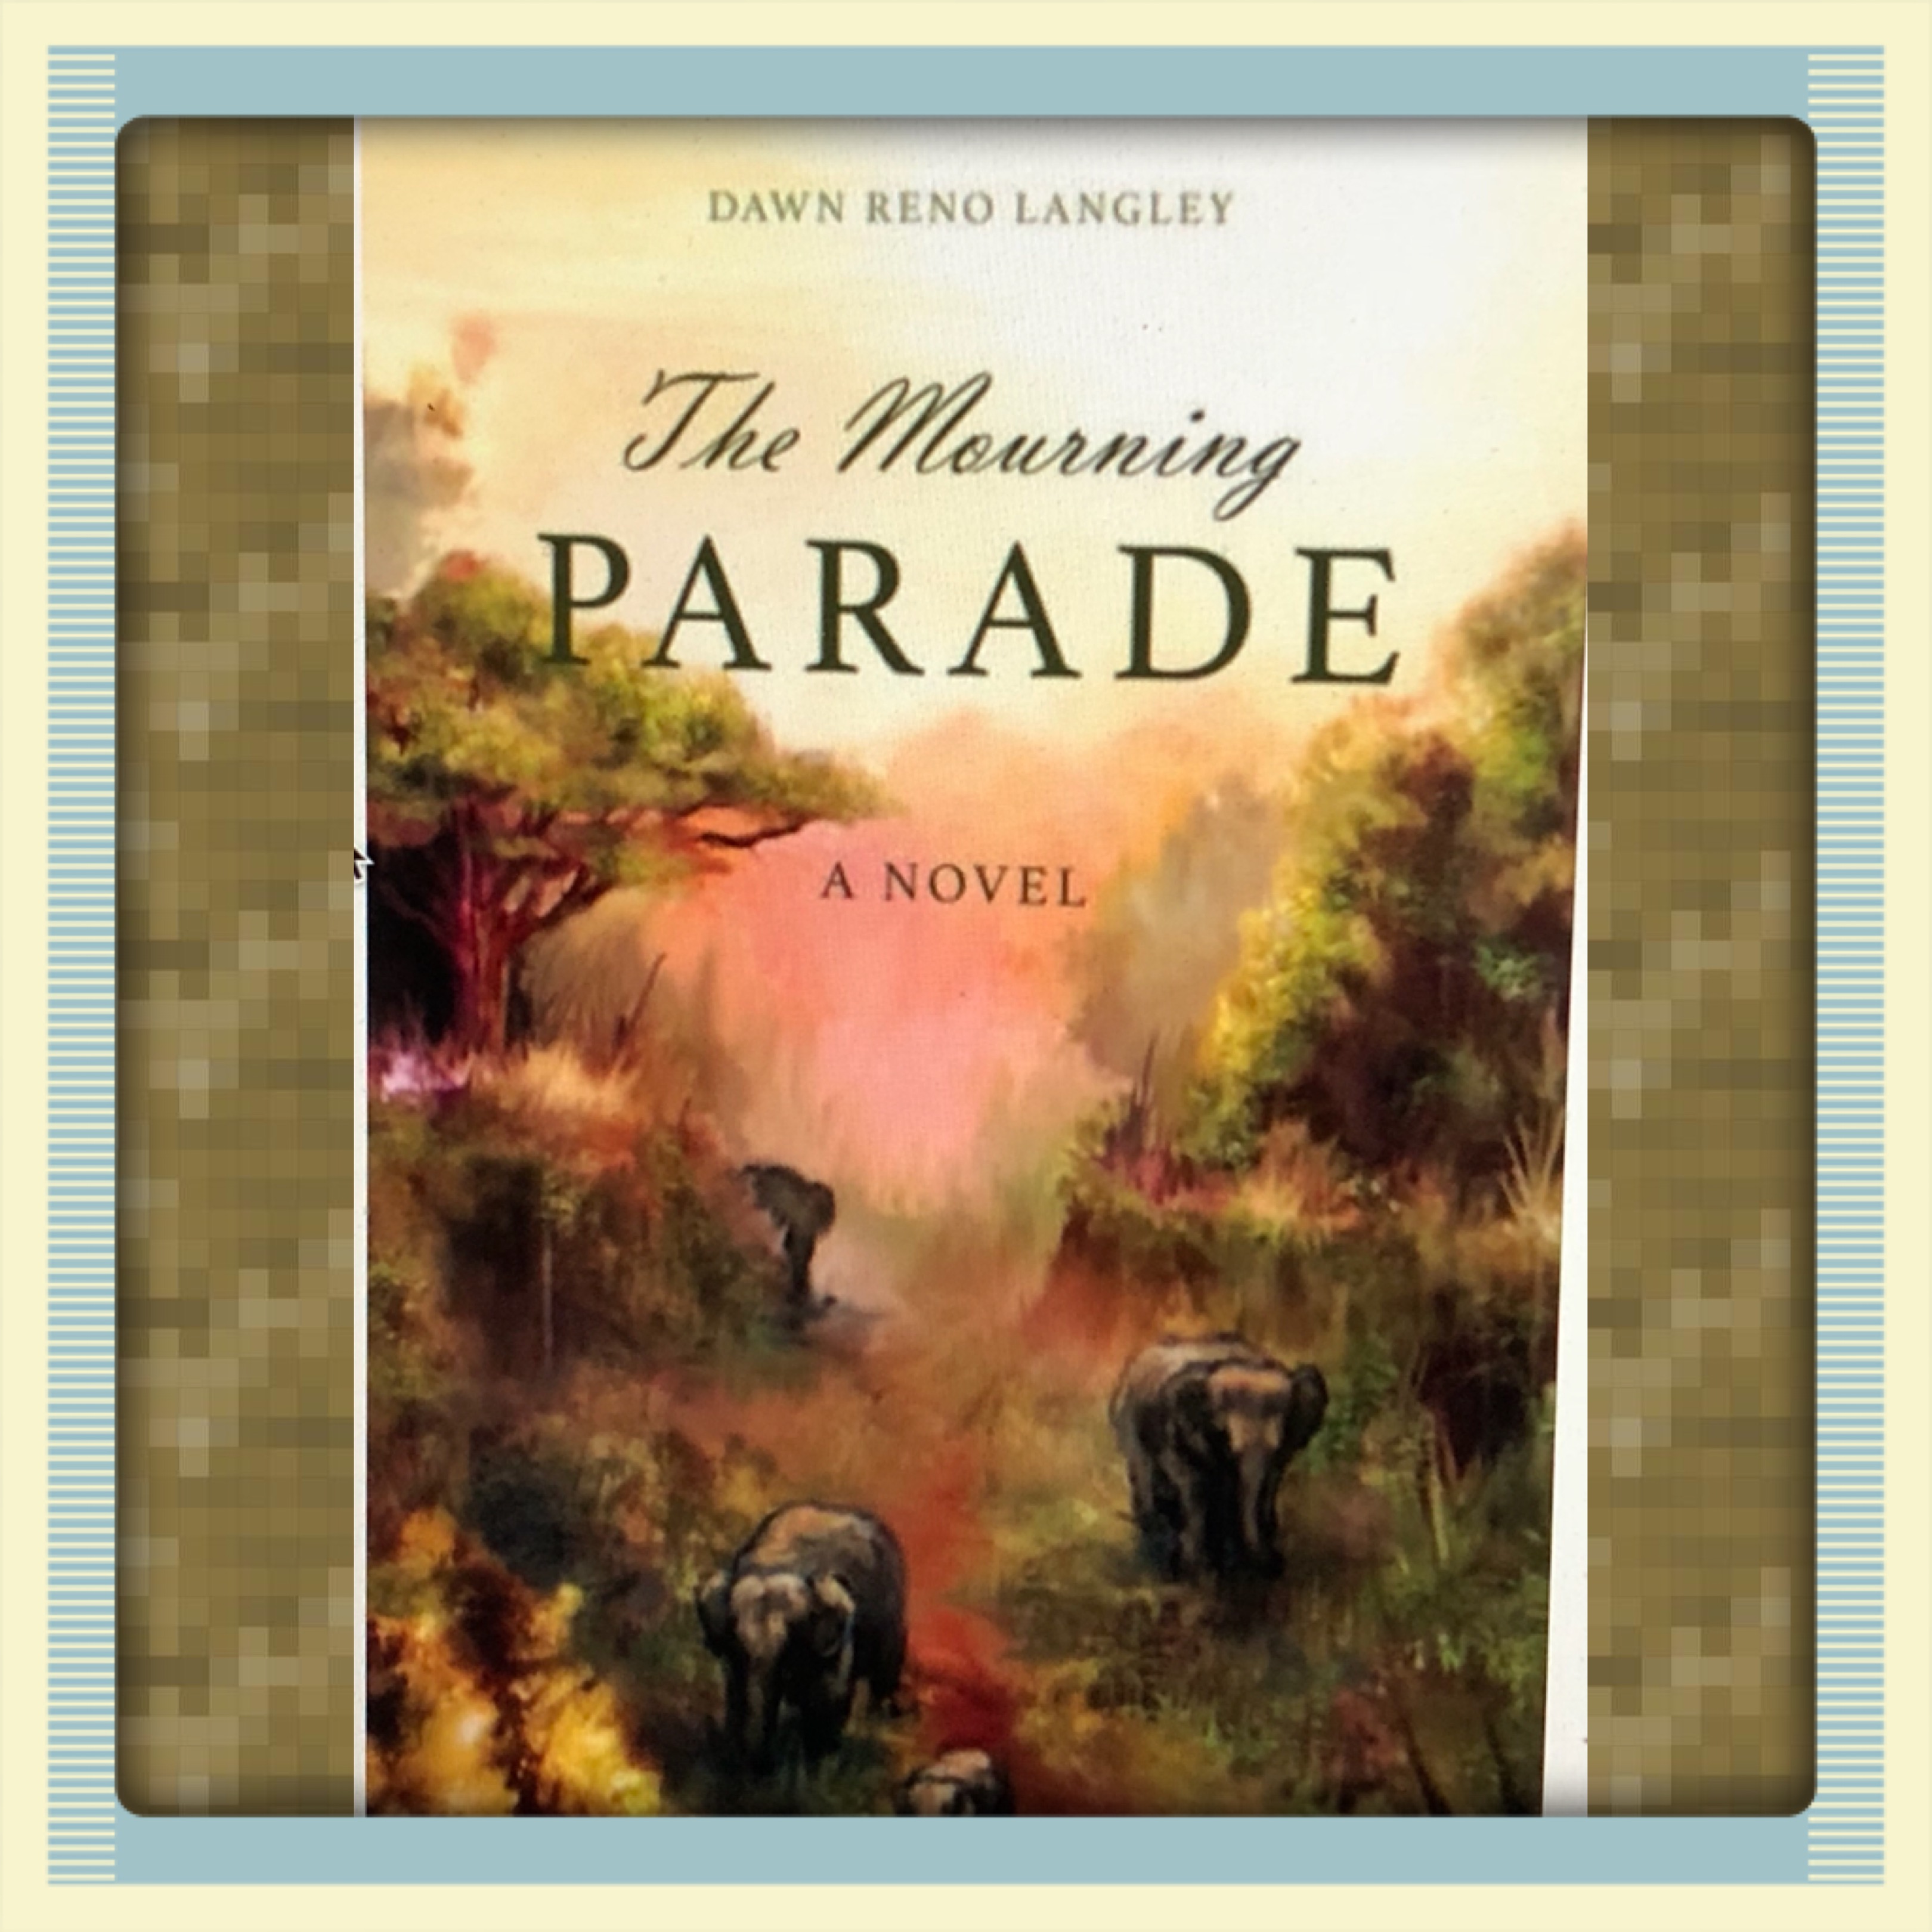 The Mourning Parade by Dawn Reno Langley